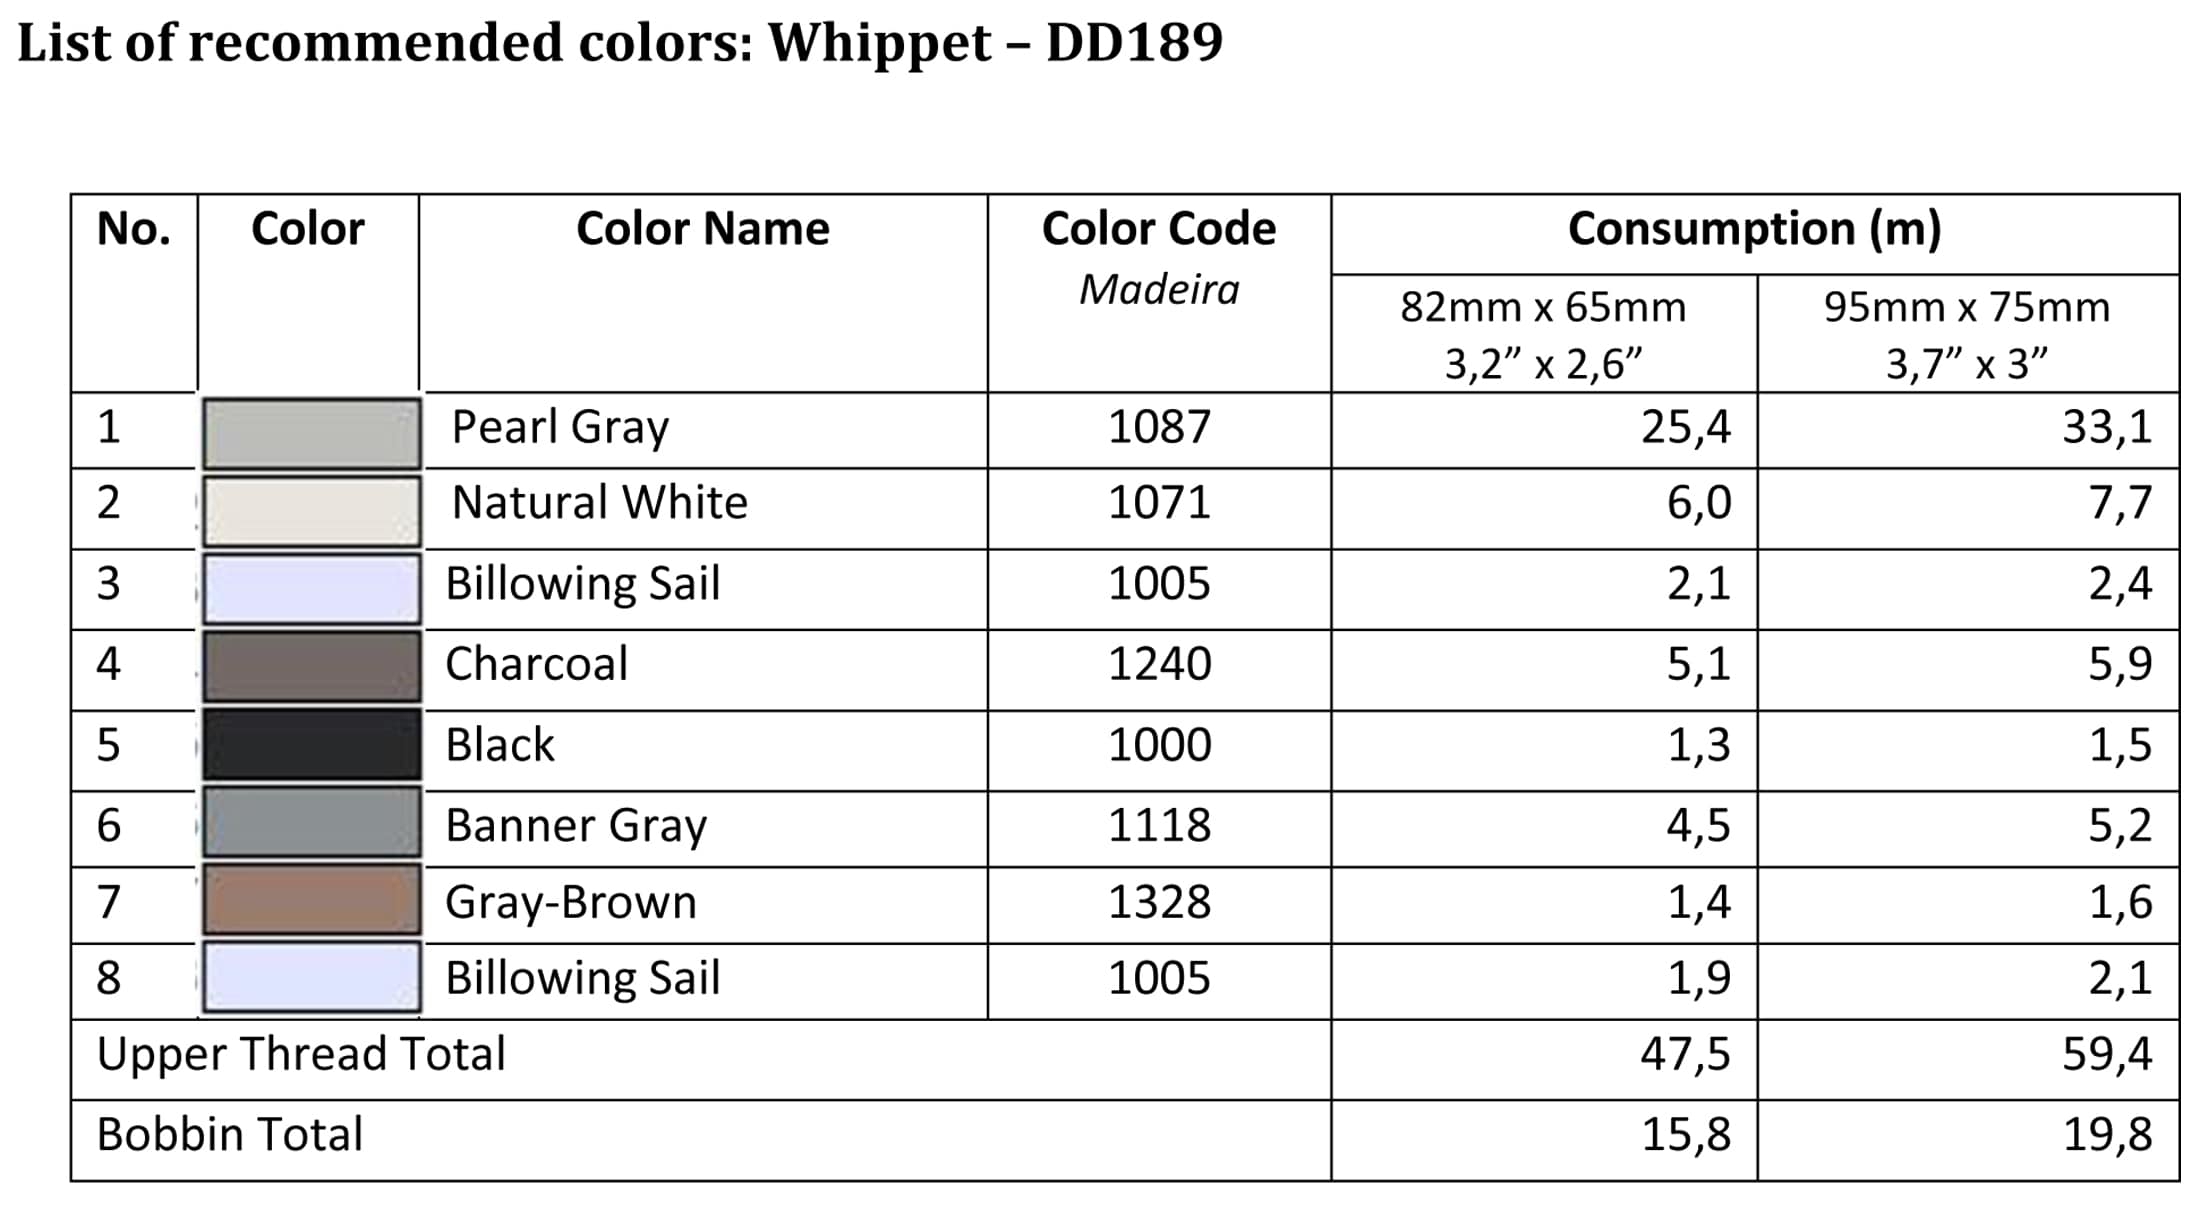 List of recommended colors - DD189